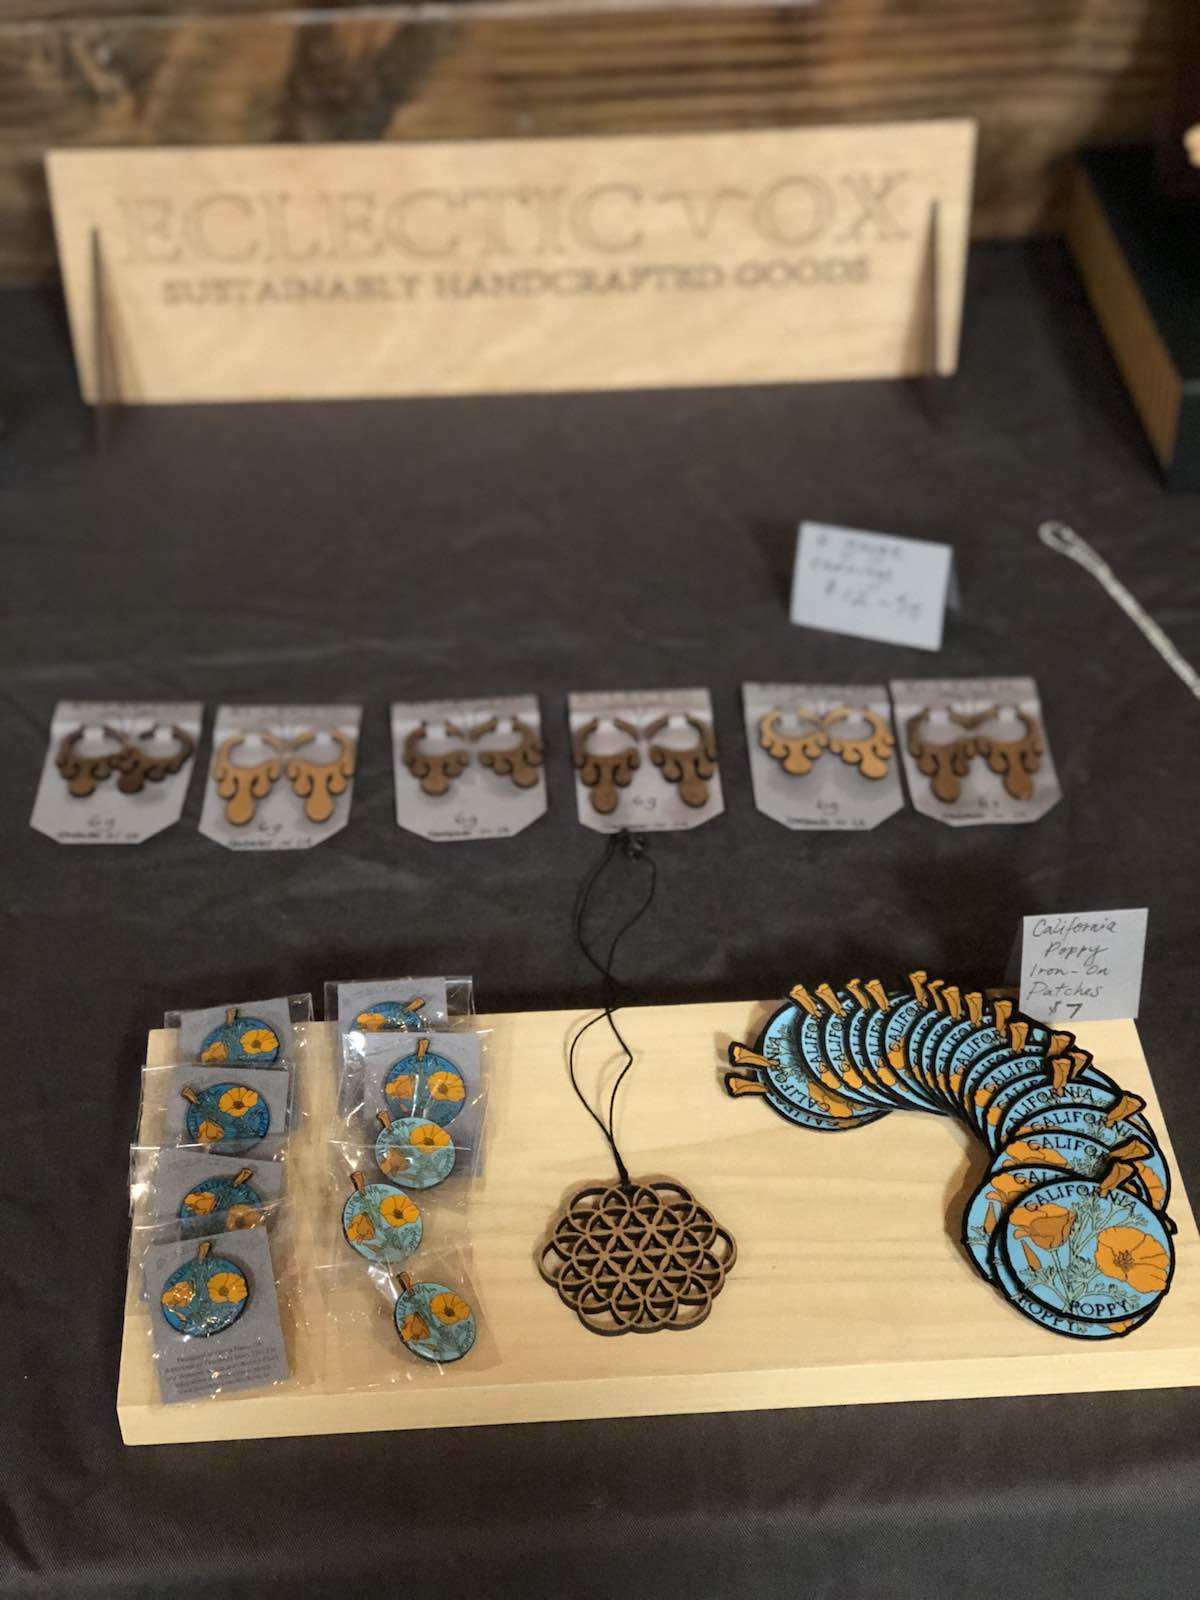 Poppies and Pins: Wearable, handmade art by Molly Croteau of Eclectic Ox, Costa Mesa, California. (photo: Samantha Chagollan)